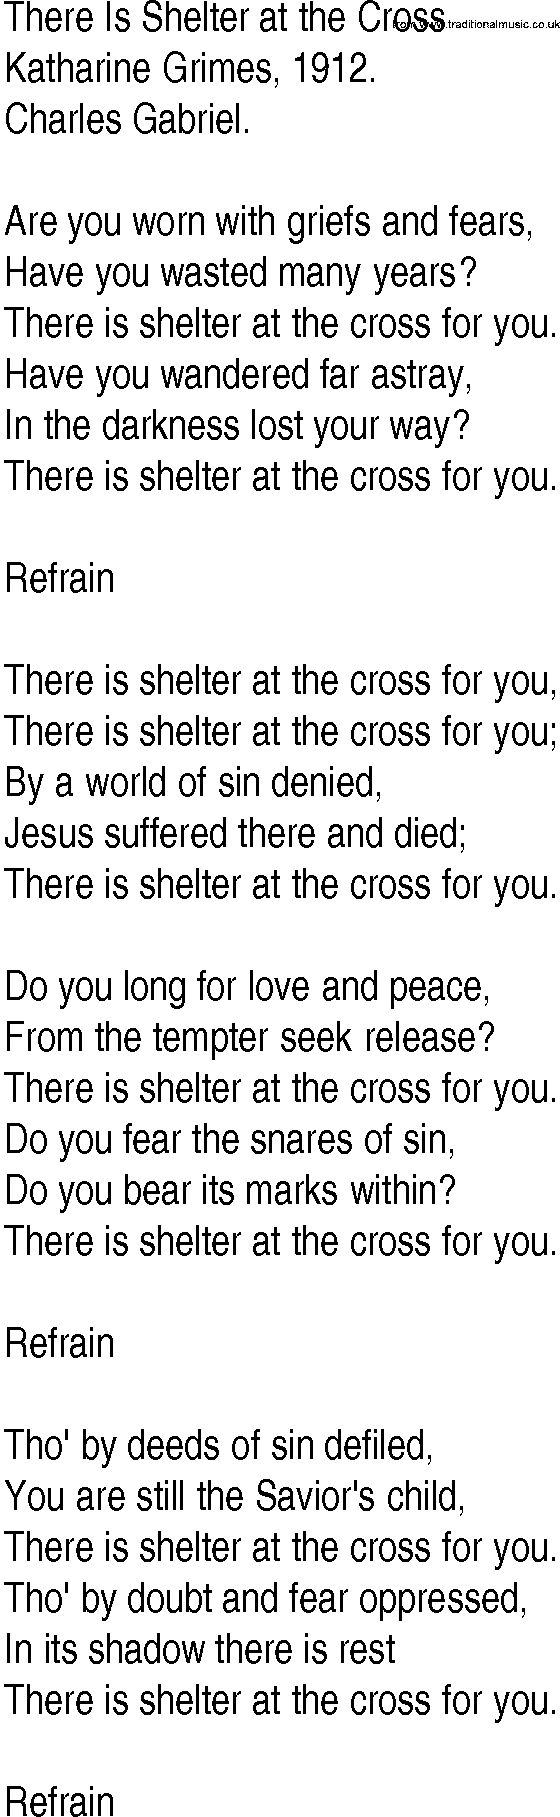 Hymn and Gospel Song: There Is Shelter at the Cross by Katharine Grimes lyrics